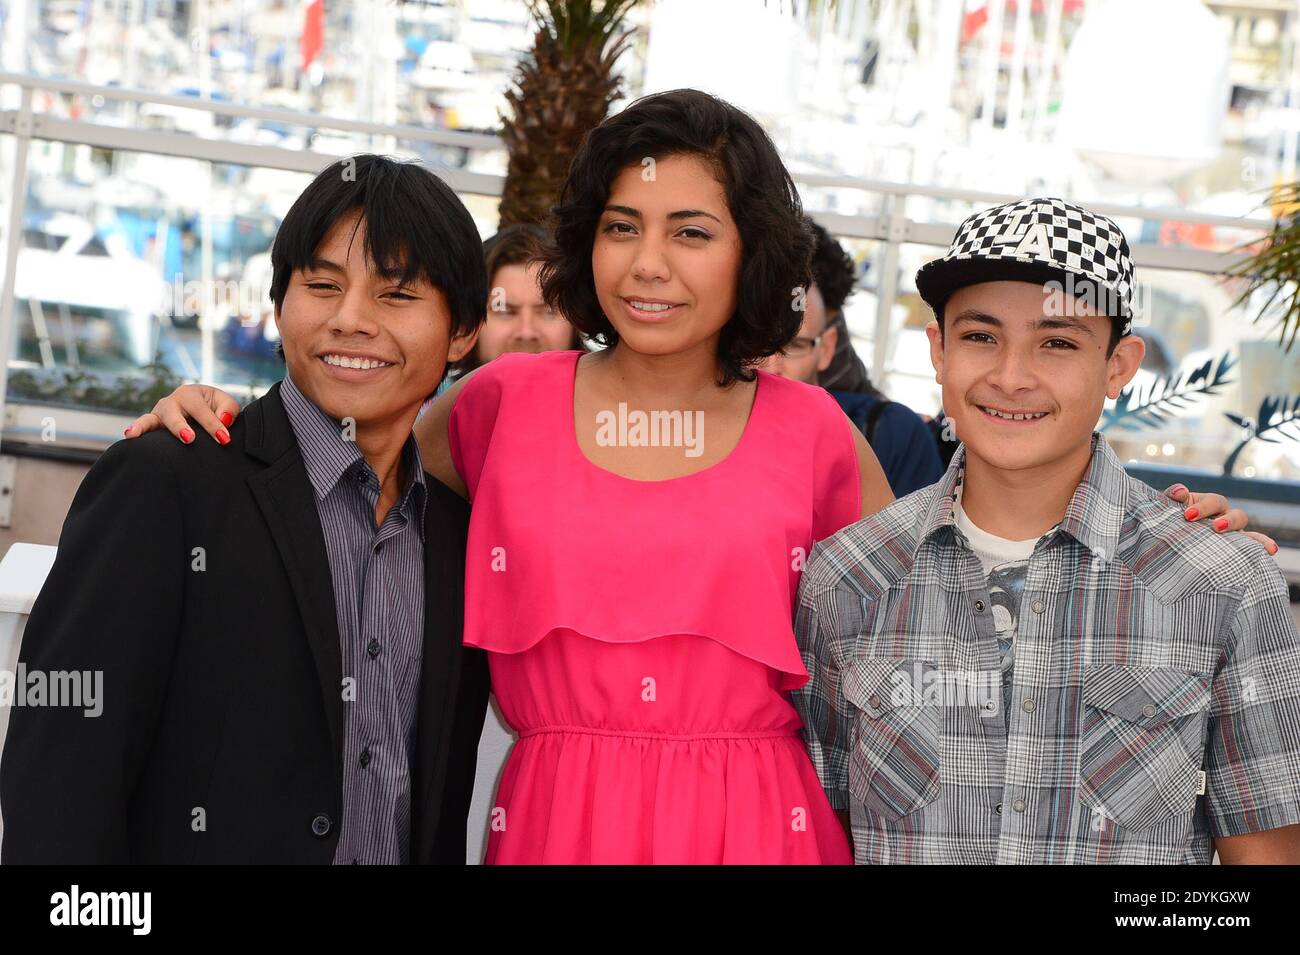 Karen Martinez, Brandon Lopez, Rodolfo Dominguez posing at the La Jaula De  Oro photocall held at the Palais Des Festivals as part of the 66th Cannes  film Festival in Cannes, France on